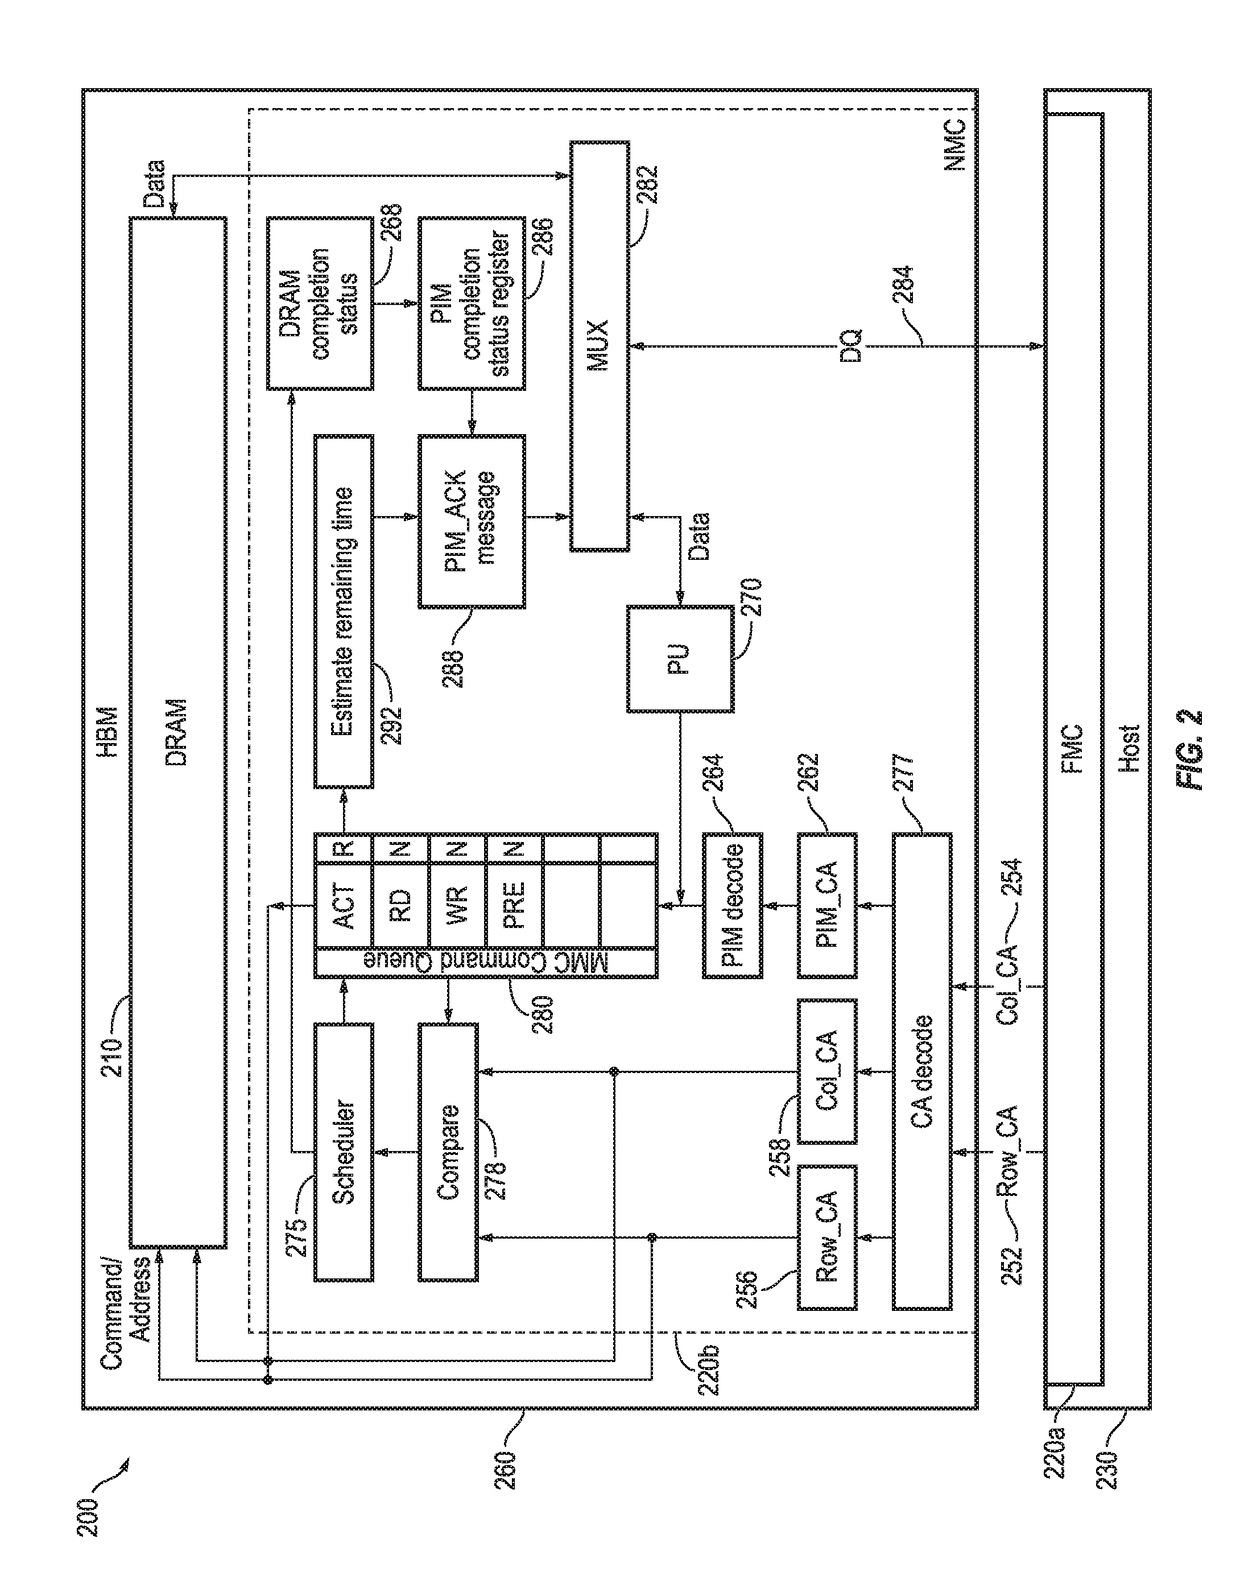 Coordinated near-far memory controller for process-in-hbm